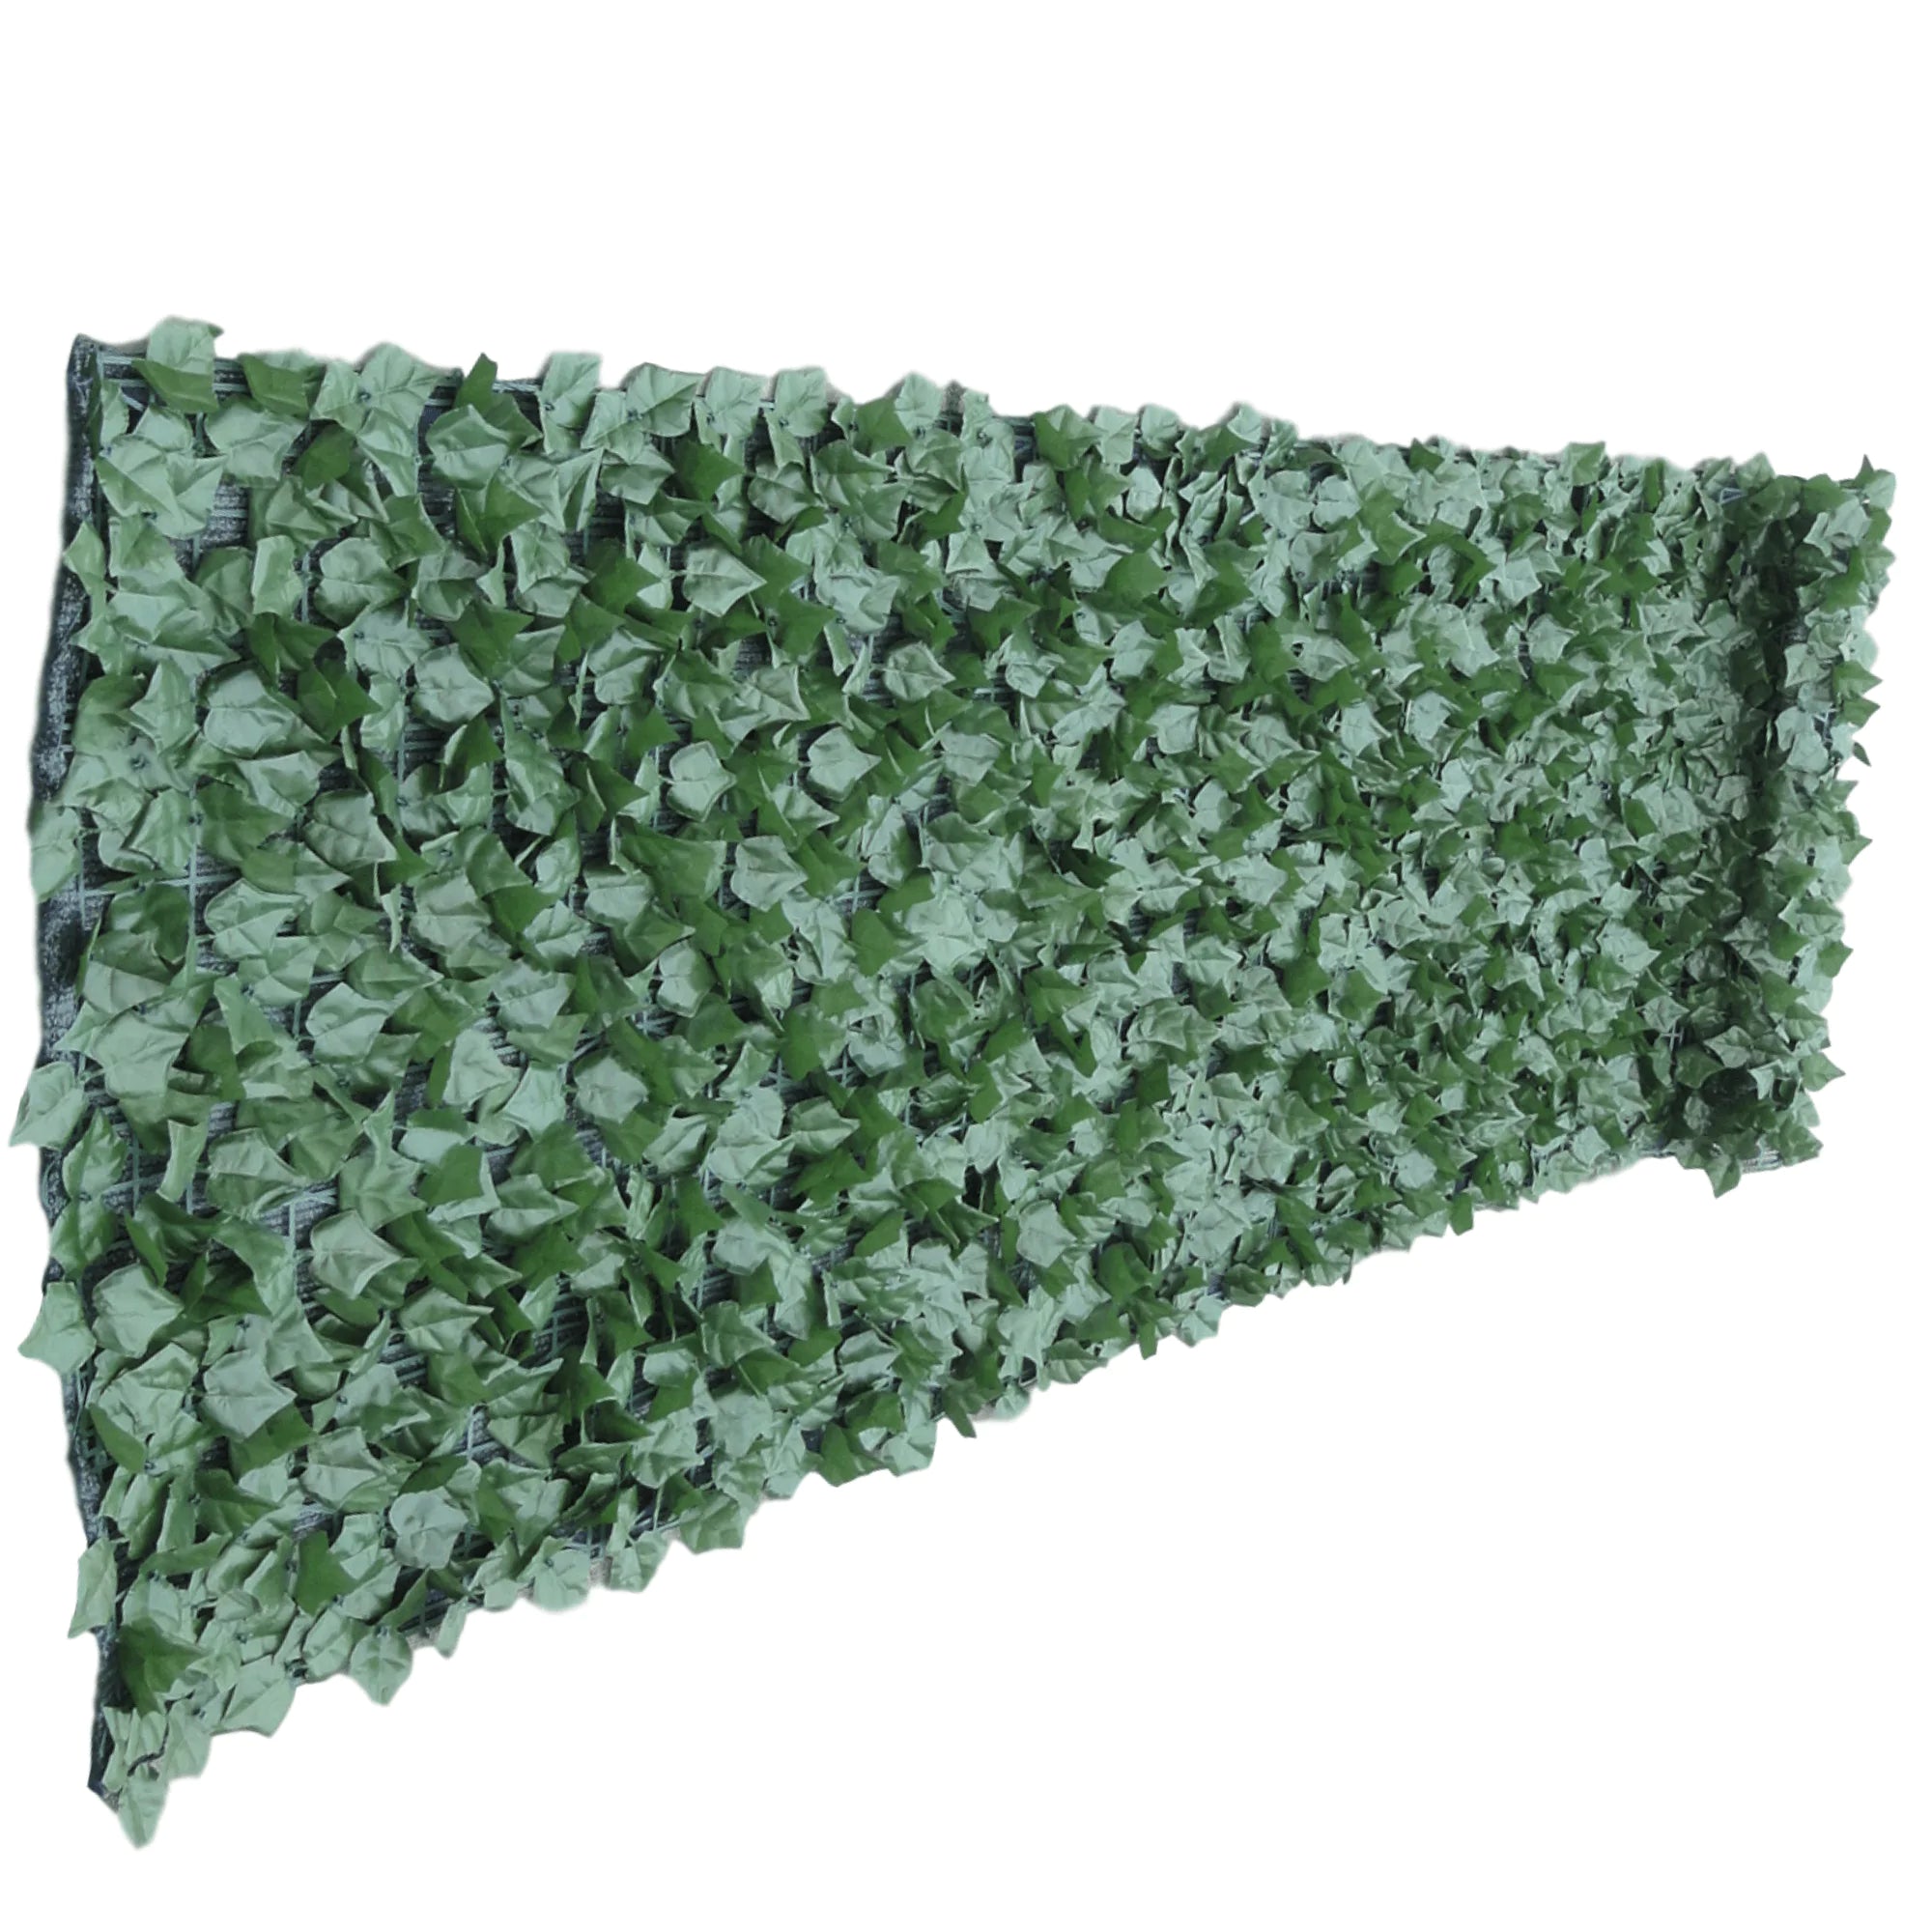 Faux Ivy Privacy Fence Shade Cloth Backing 120